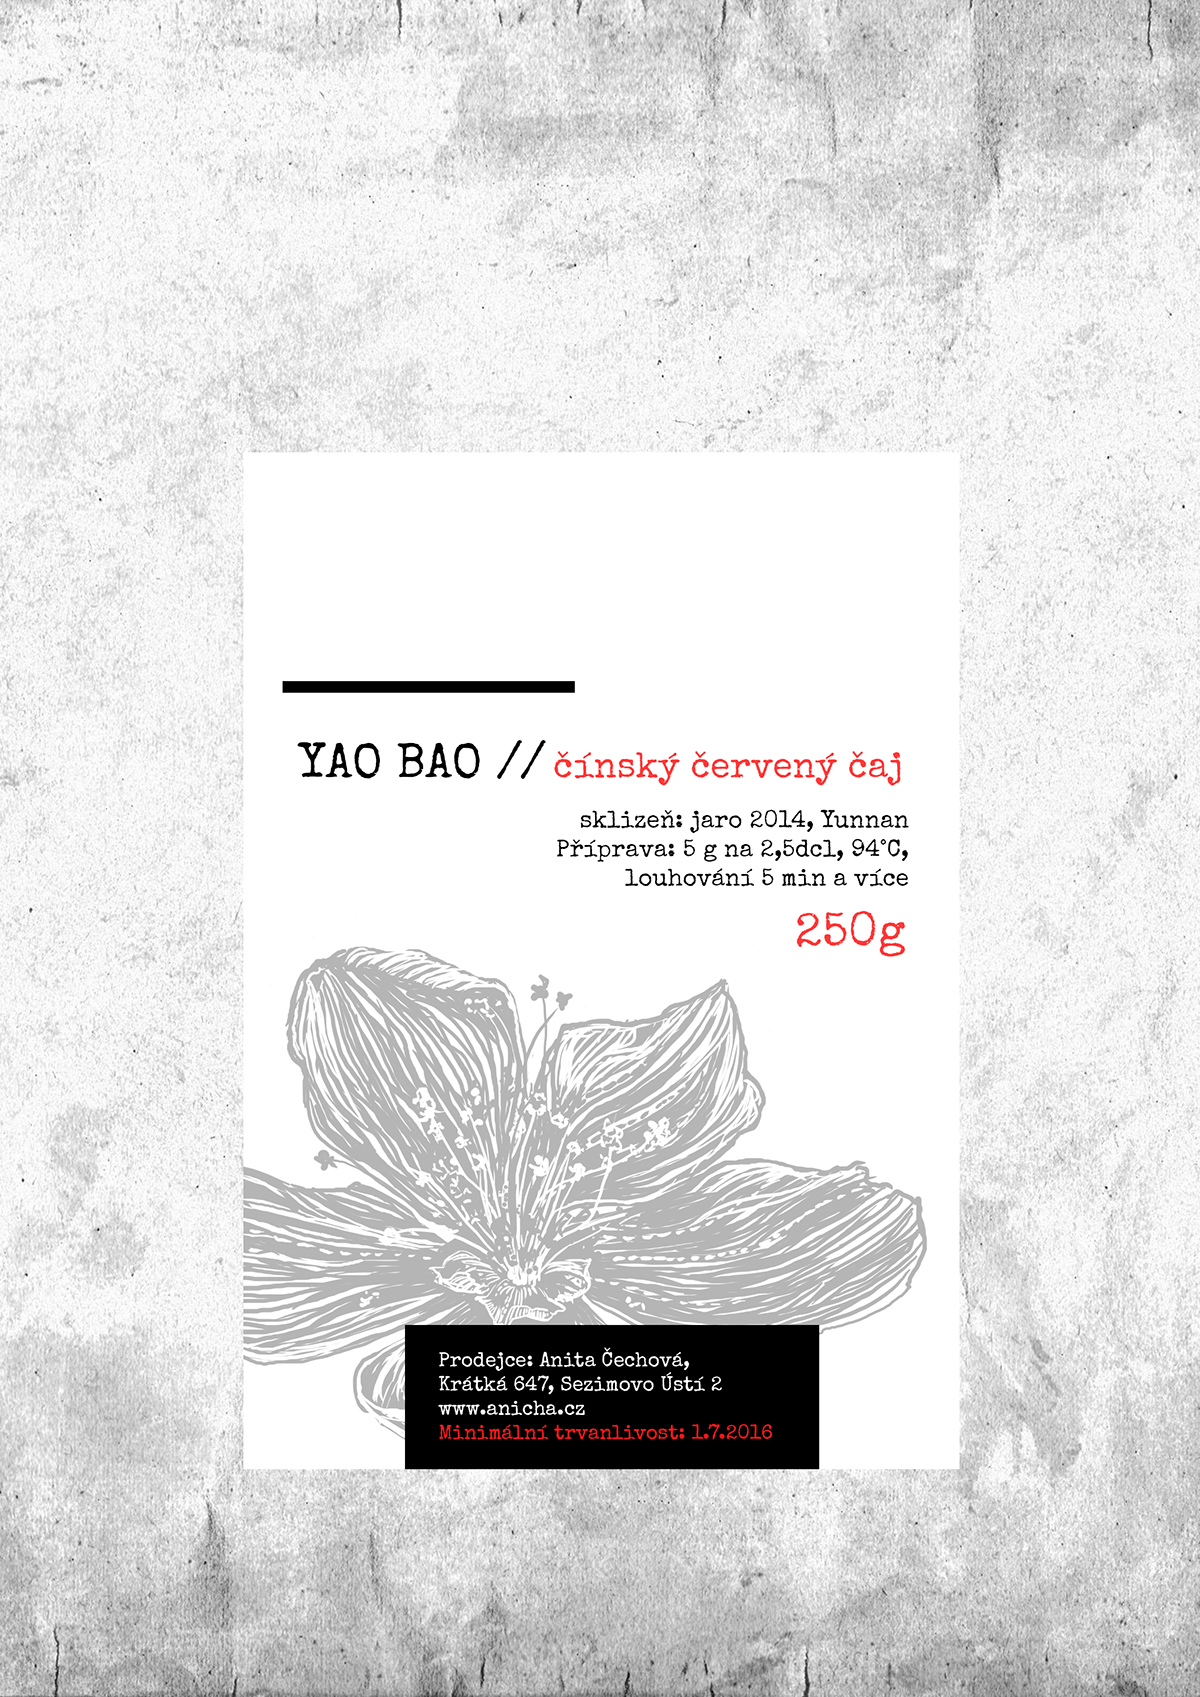 tea cover flower tea cover flower floral structure linework graphic red tea